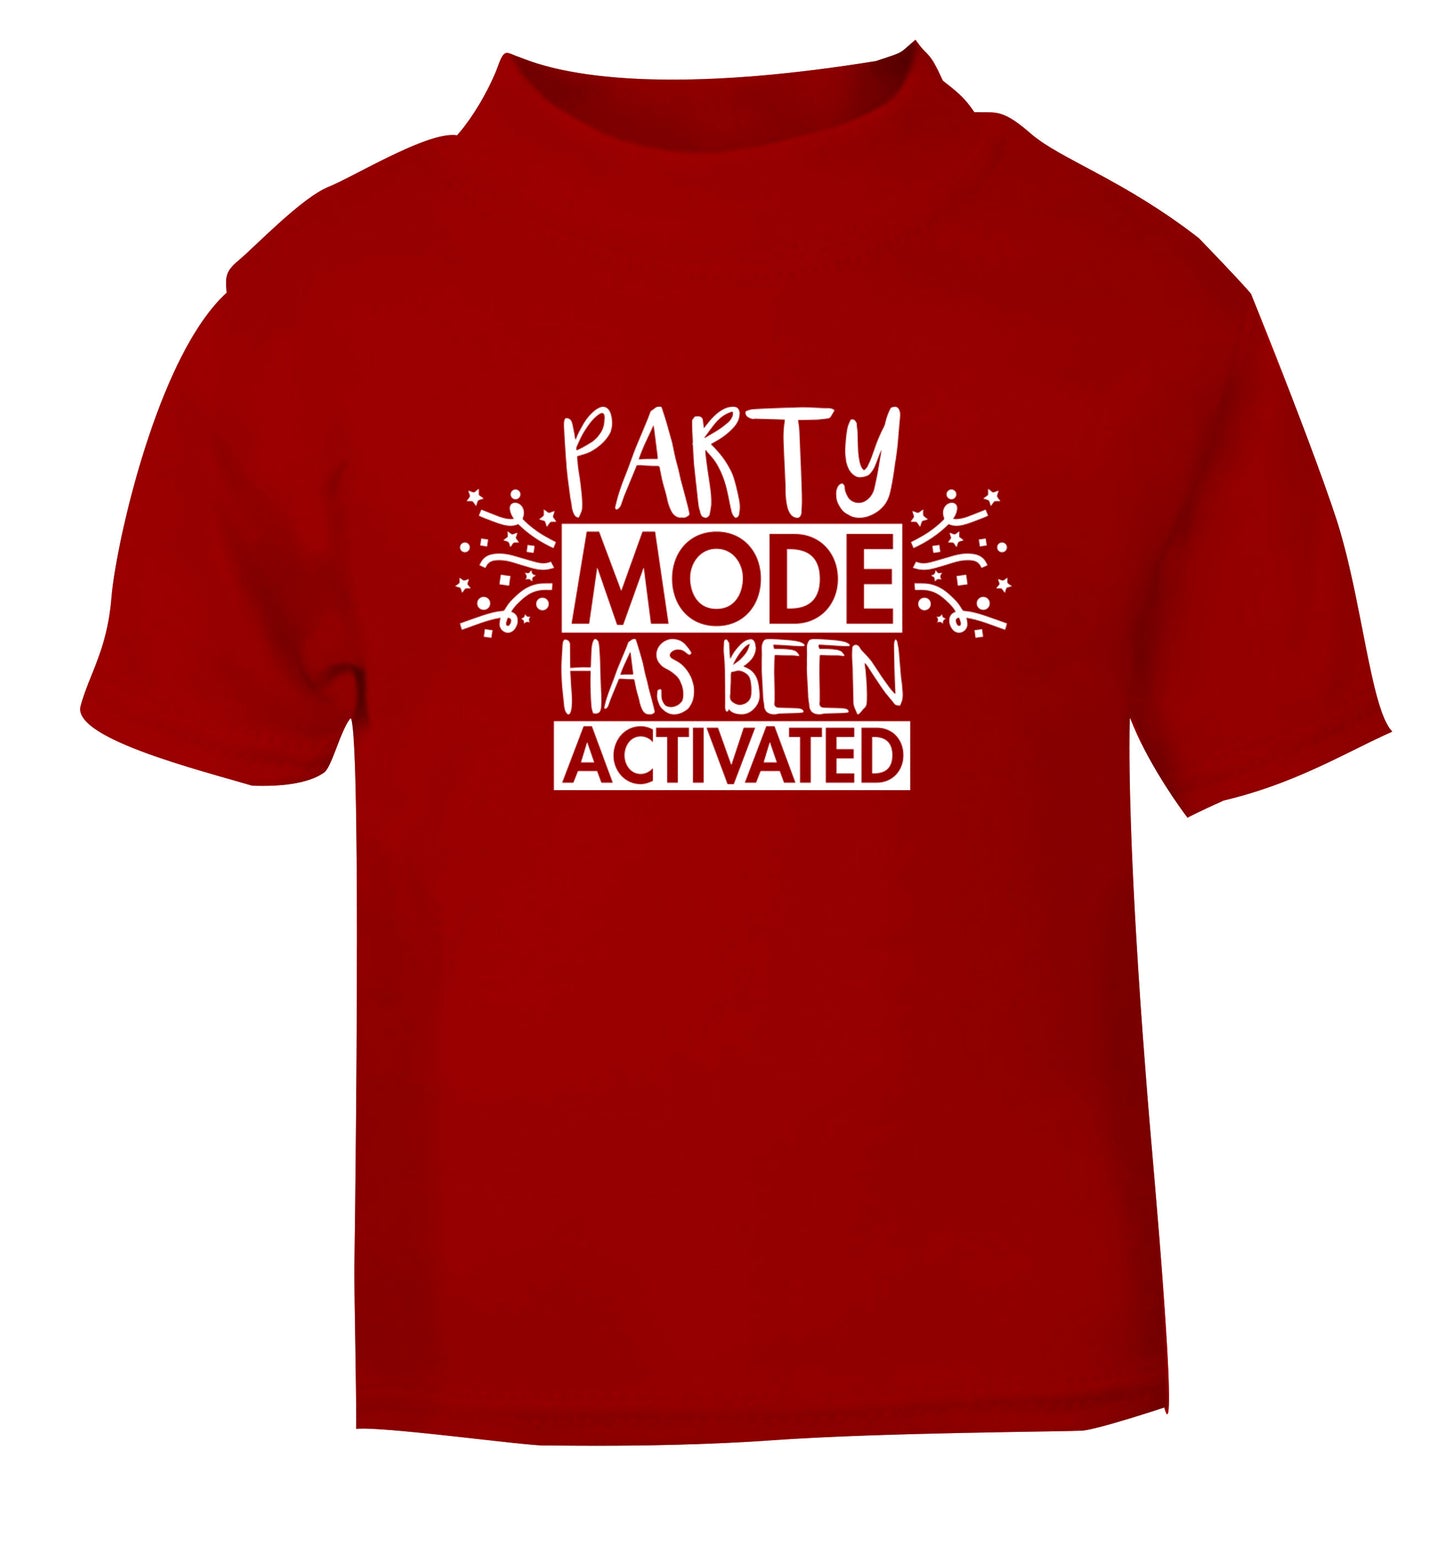 Please do not disturb party mode has been activated red Baby Toddler Tshirt 2 Years